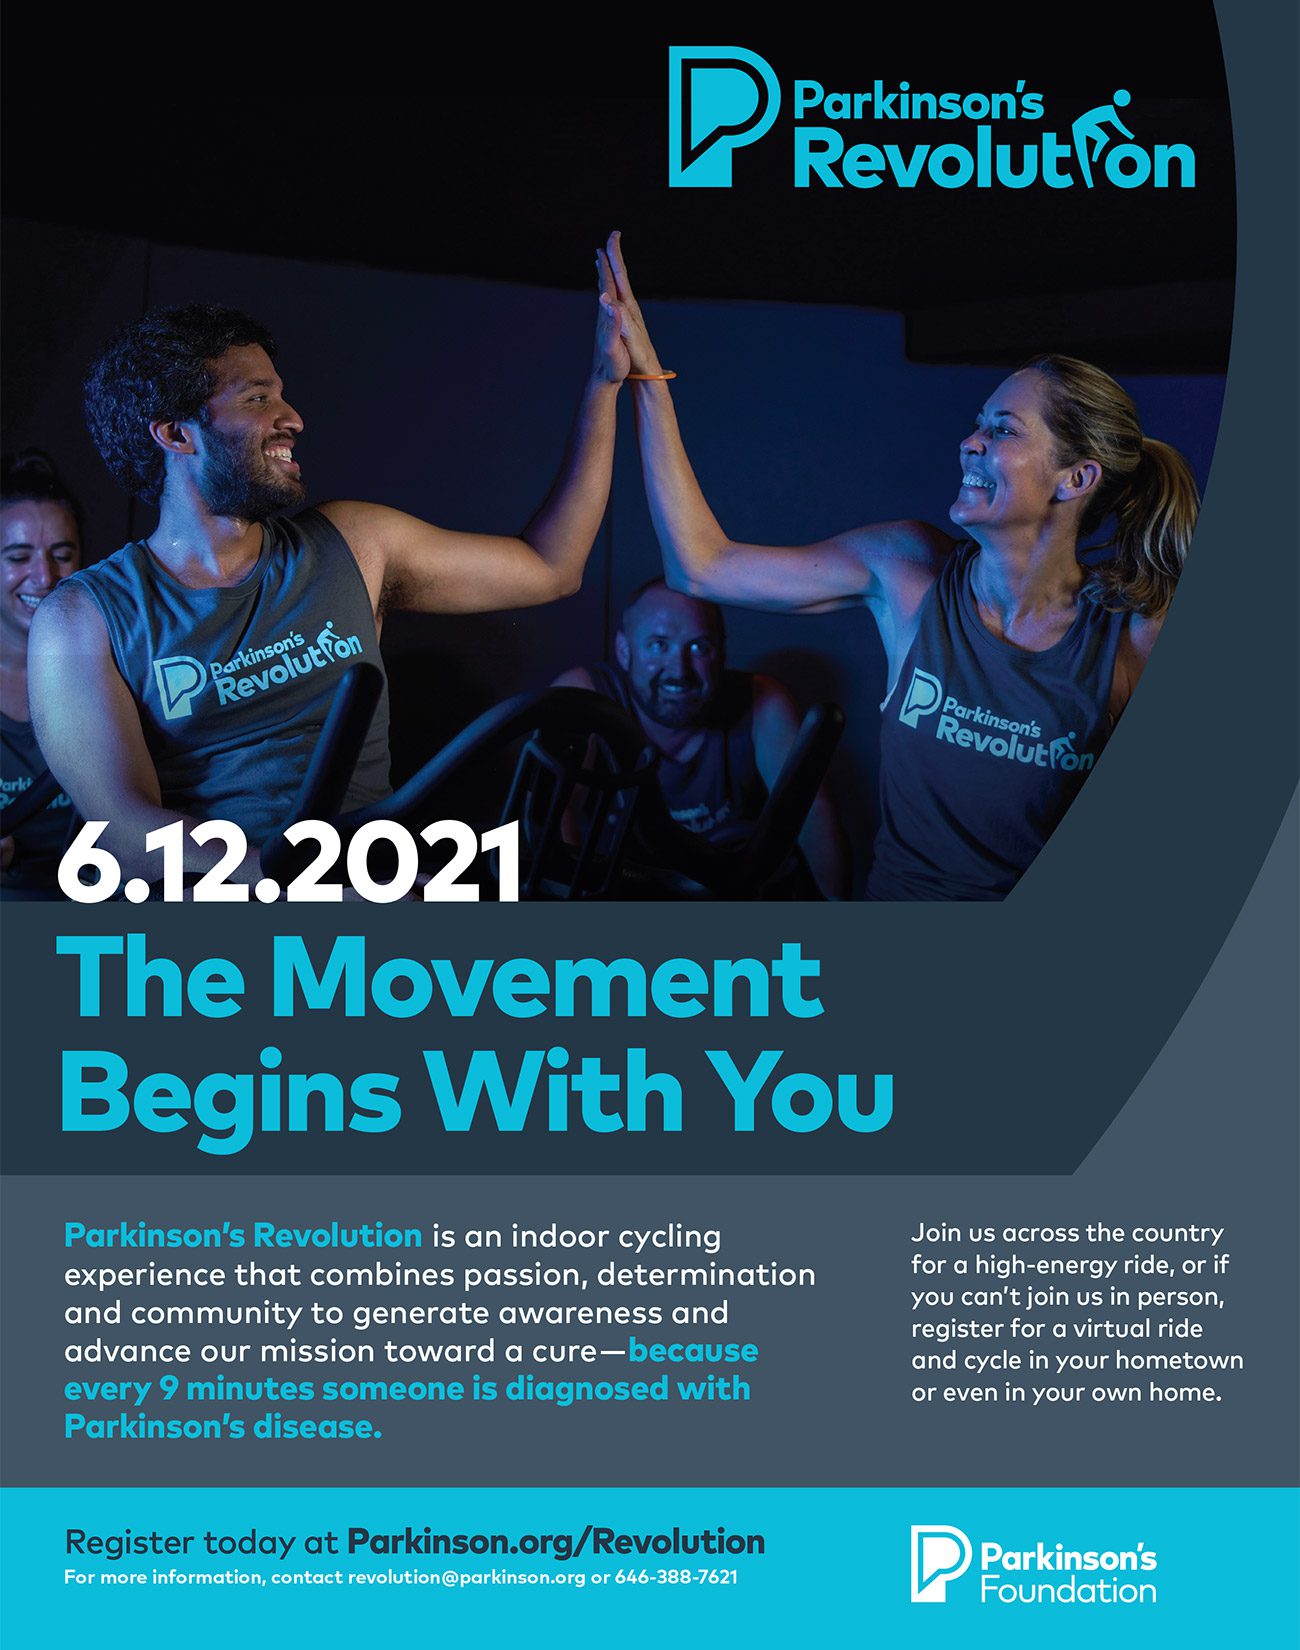 Parkinson's Revolution event flyer, promoting community involvement and awareness for Parkinson's disease.